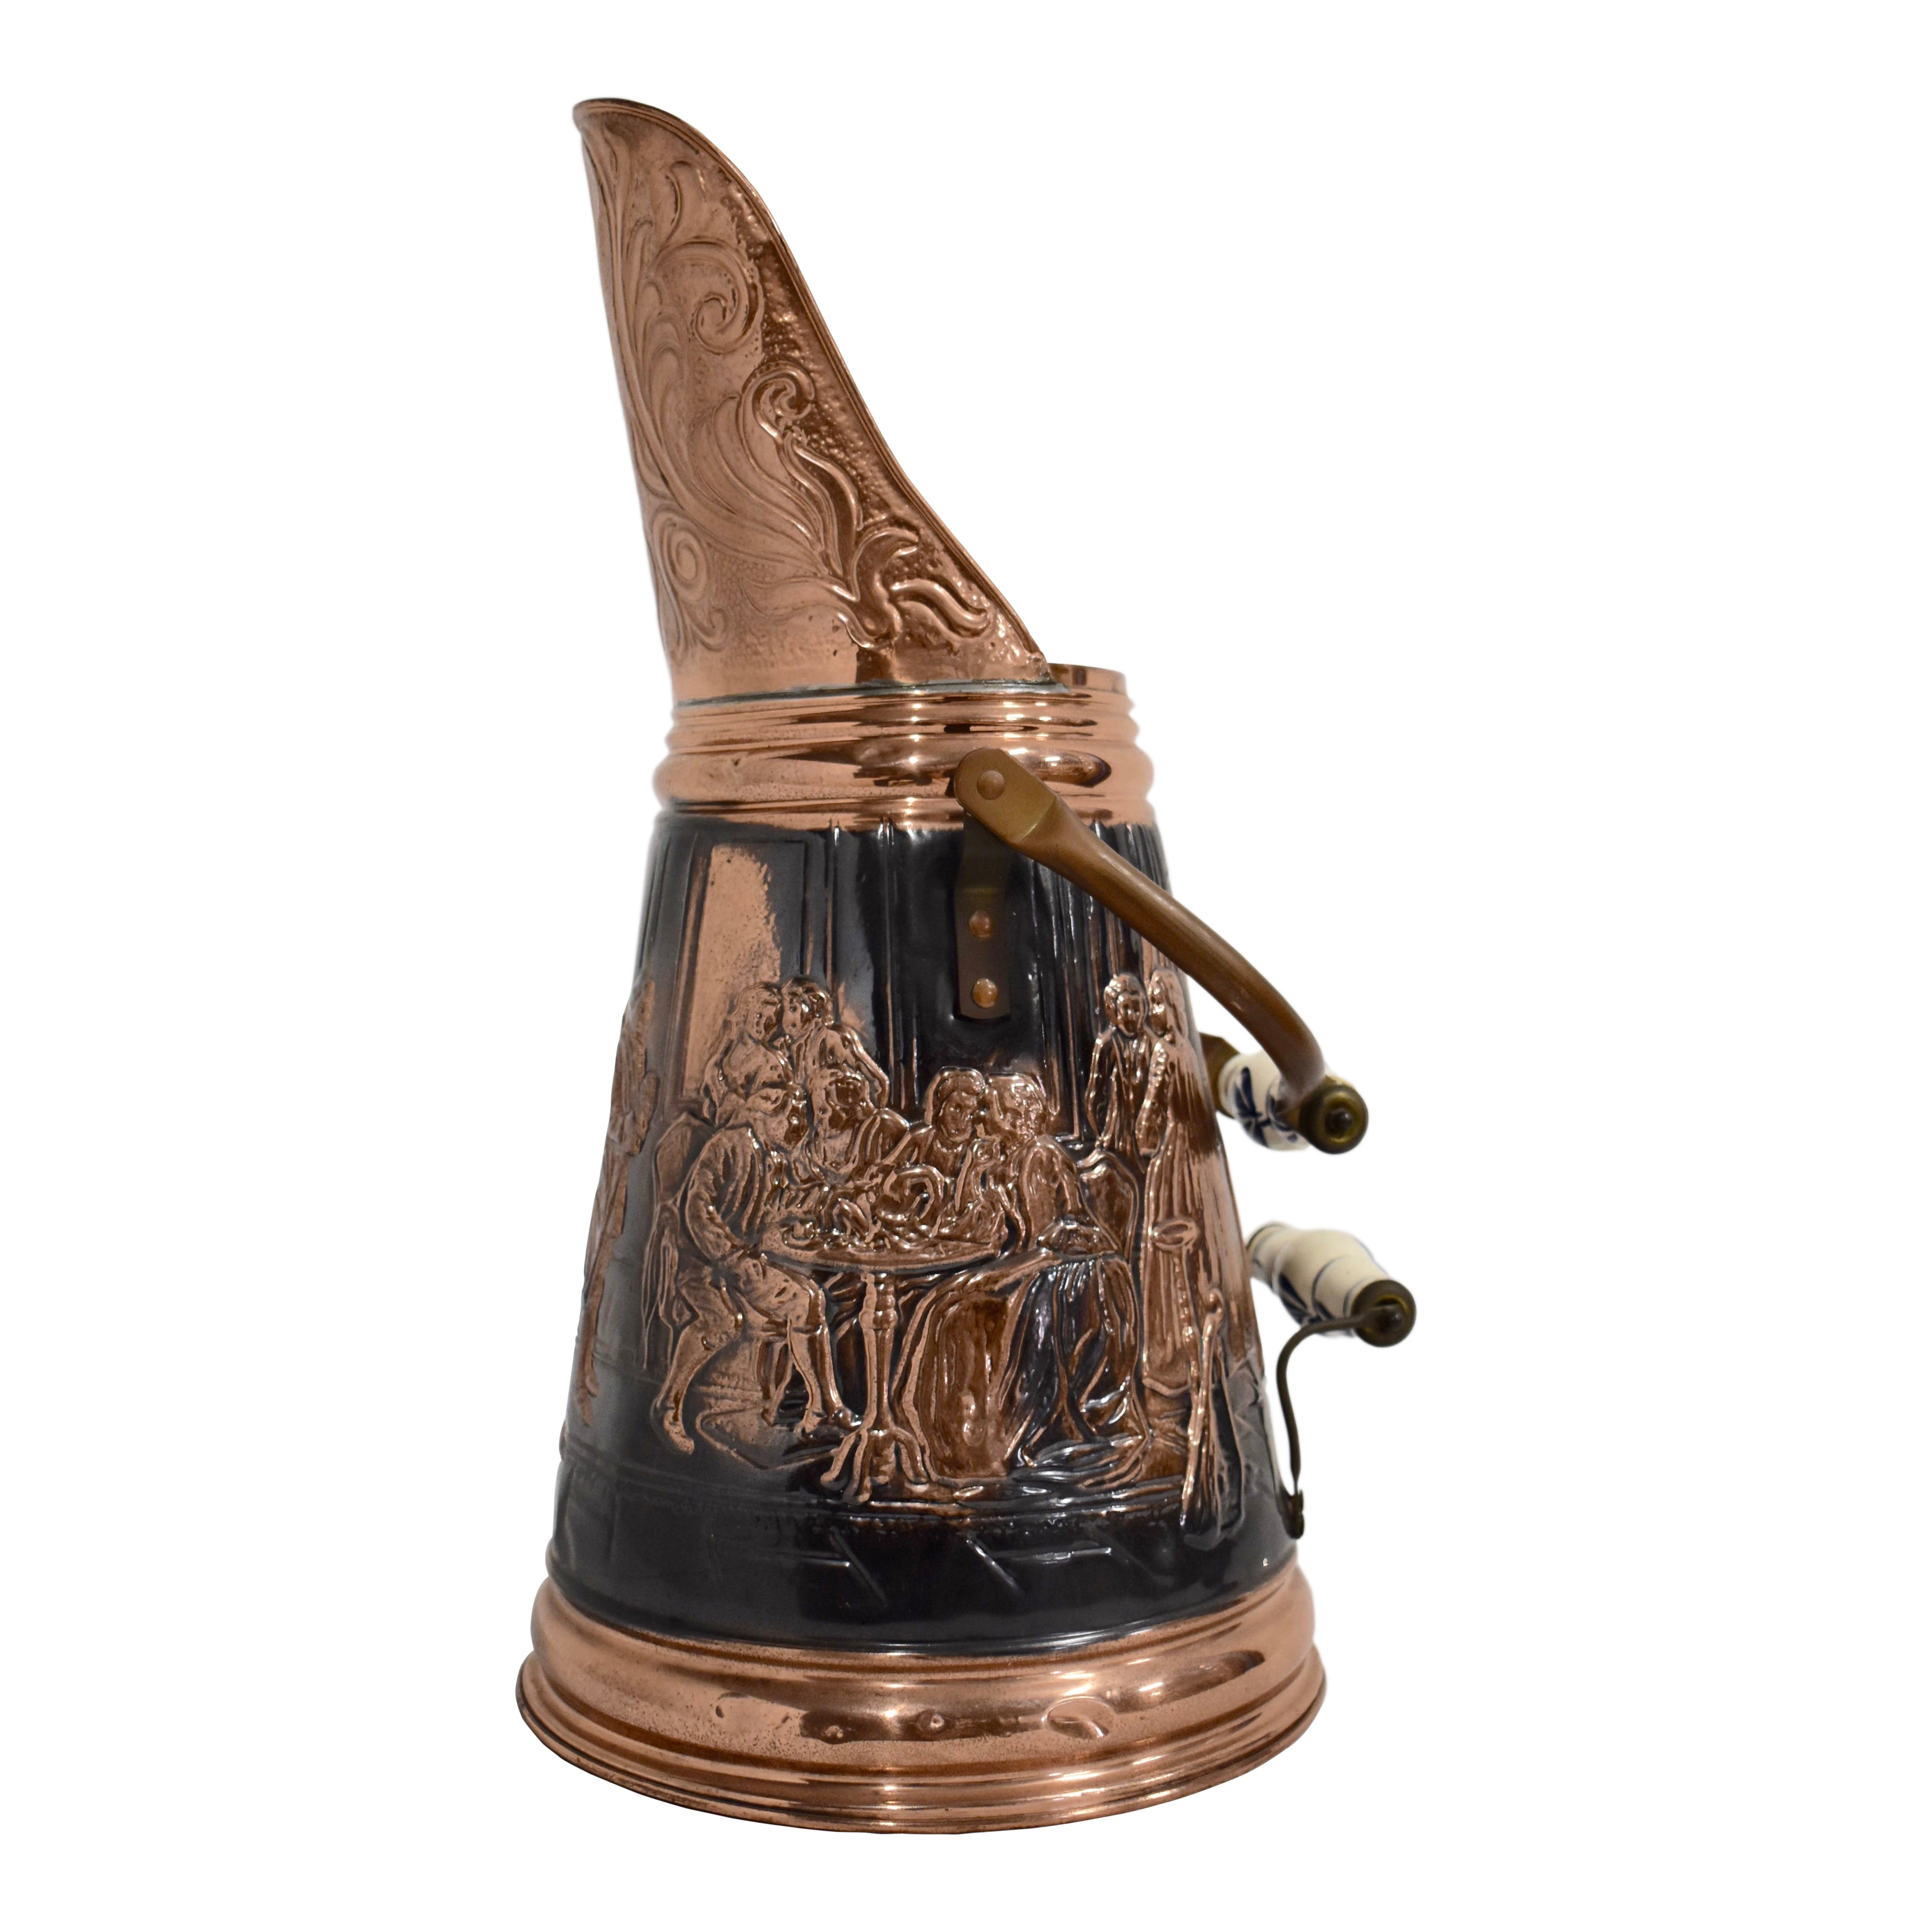 Tall Copper Bucket with Ceramic Handles